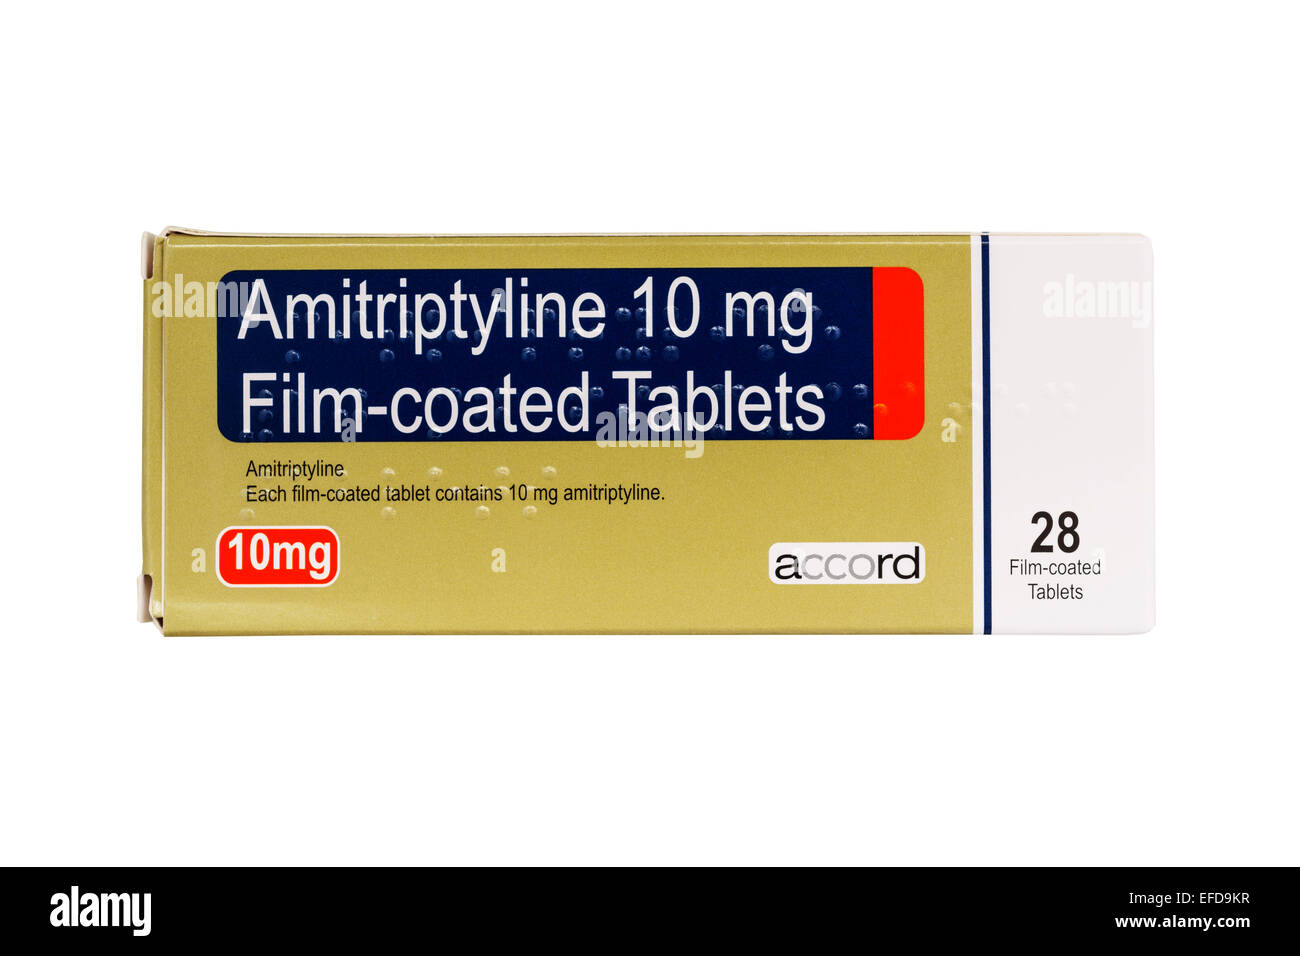 A box of Amitriptyline 10 mg Film-coated Tablets on a white background Stock Photo